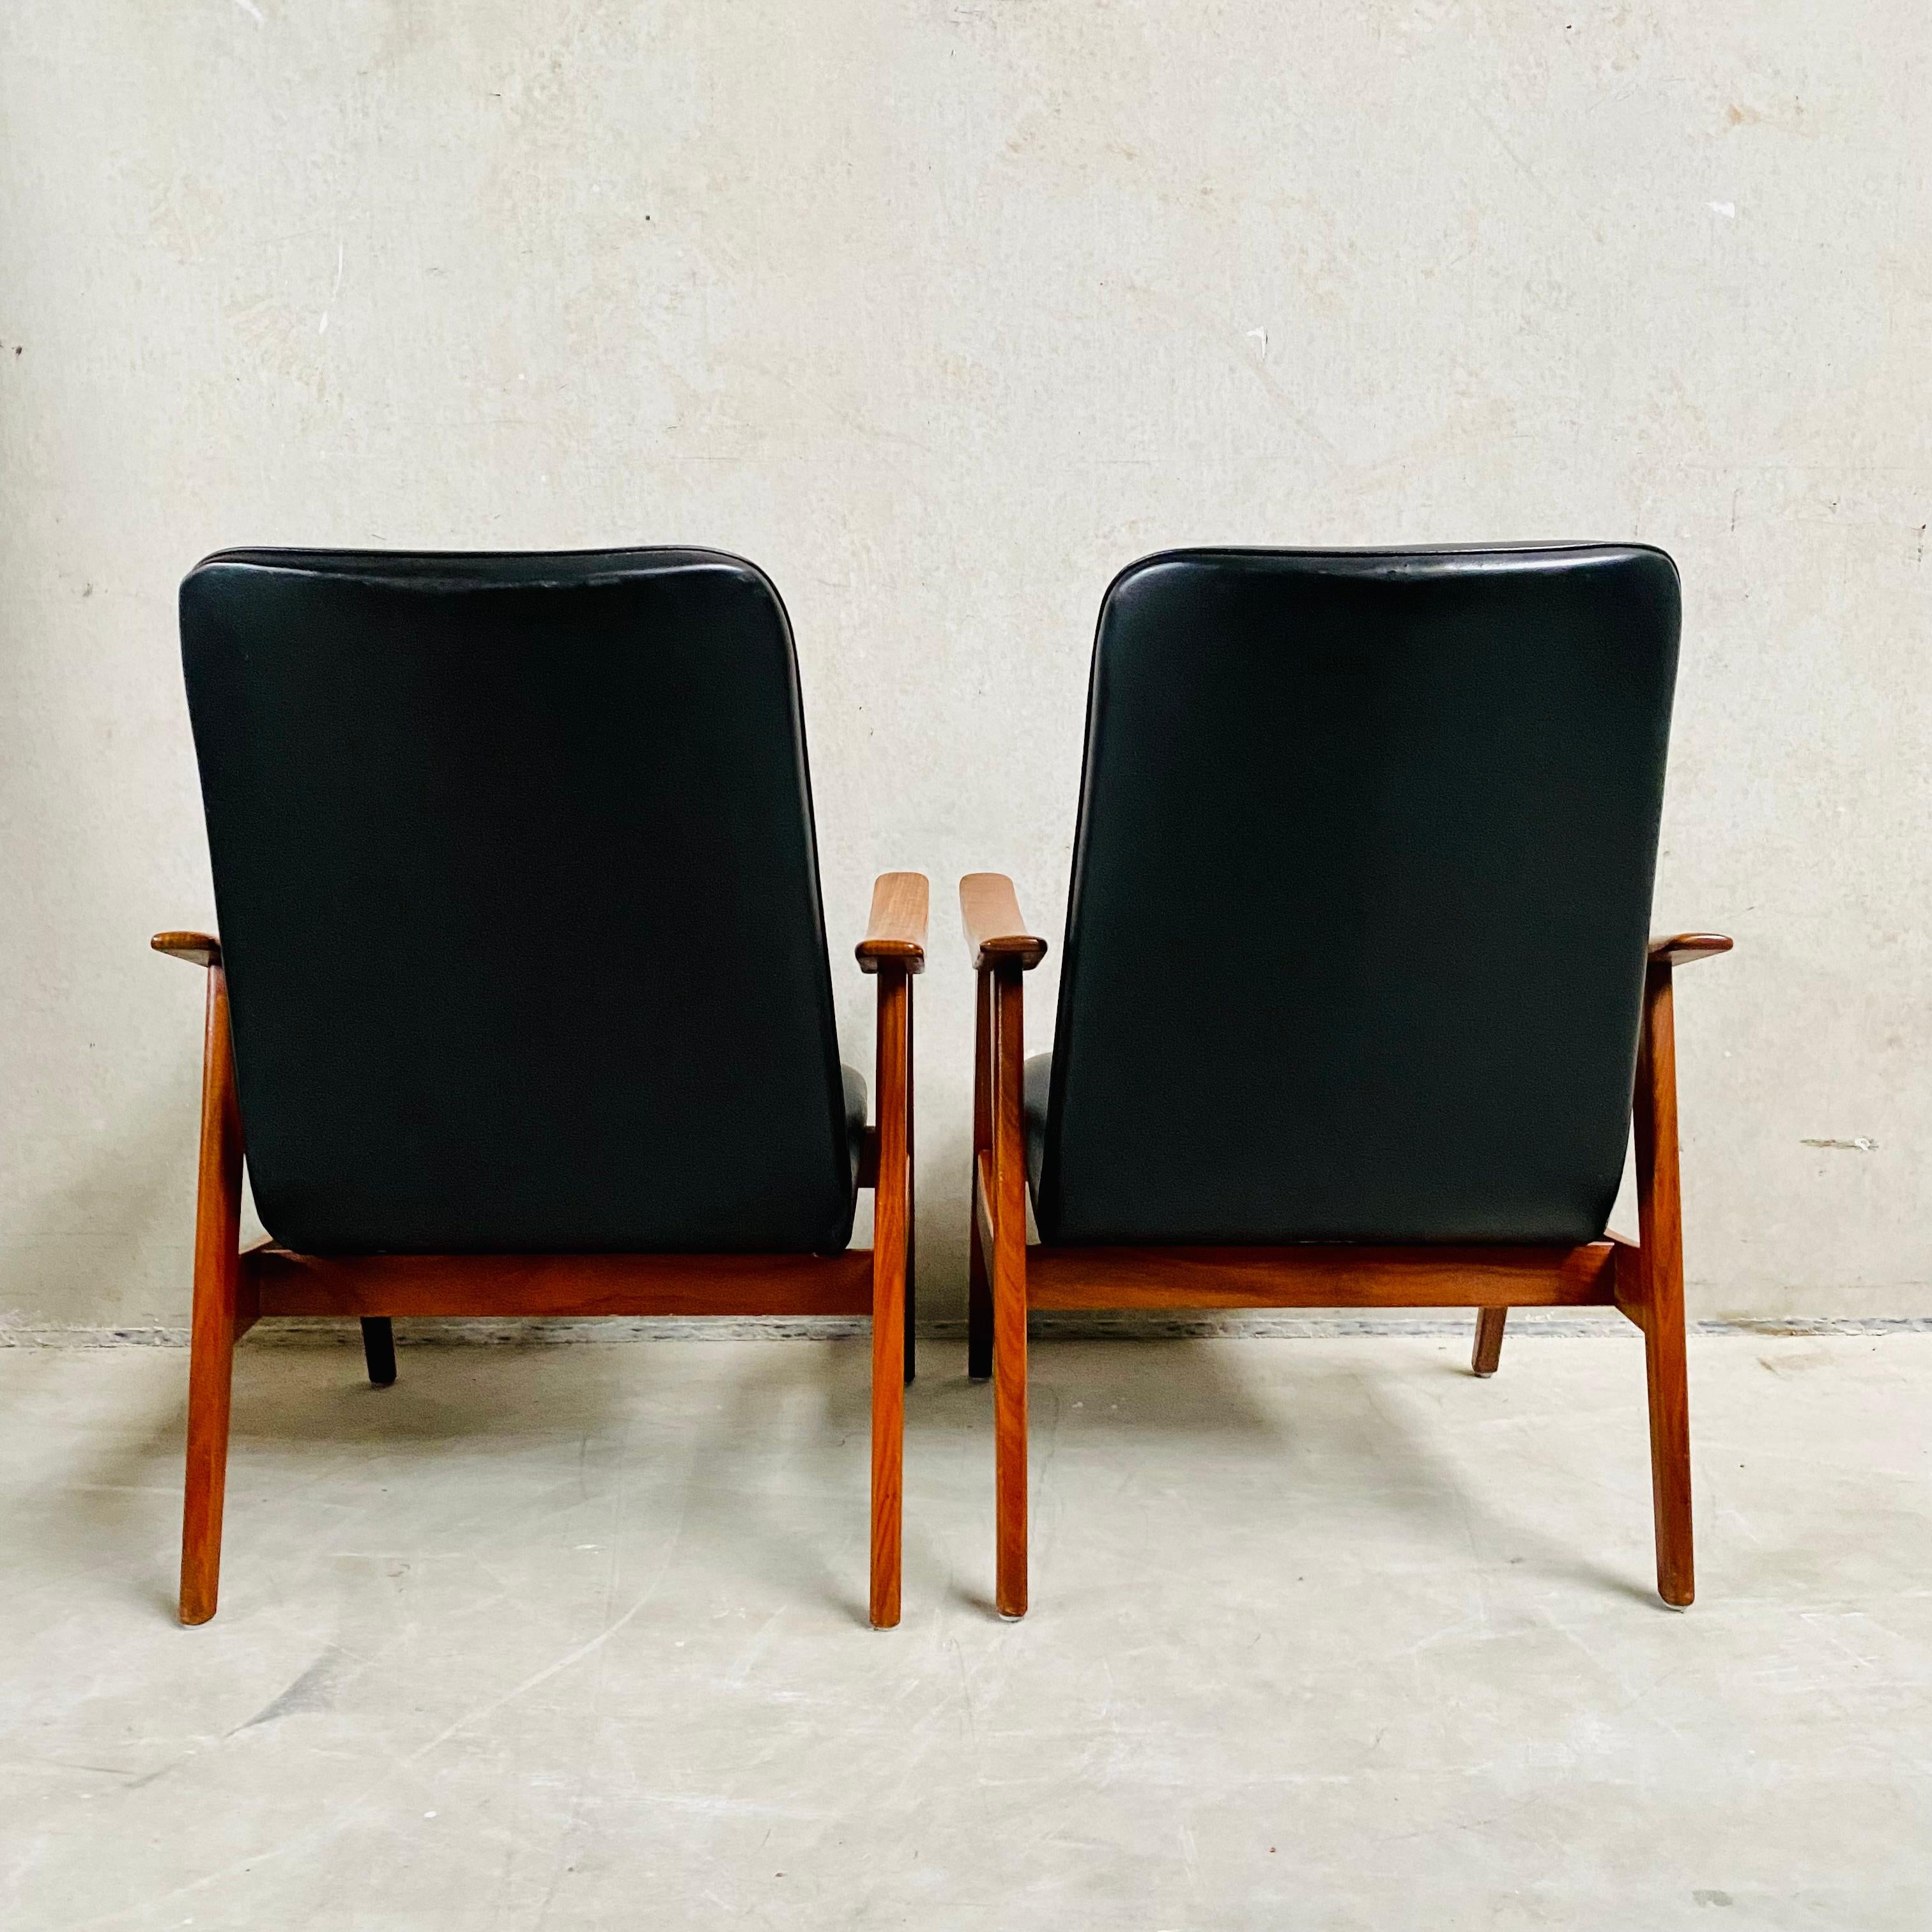 Set of Two Louis Van Teeffelen for Webe Lounge Chairs, Netherlands, 1960s For Sale 8